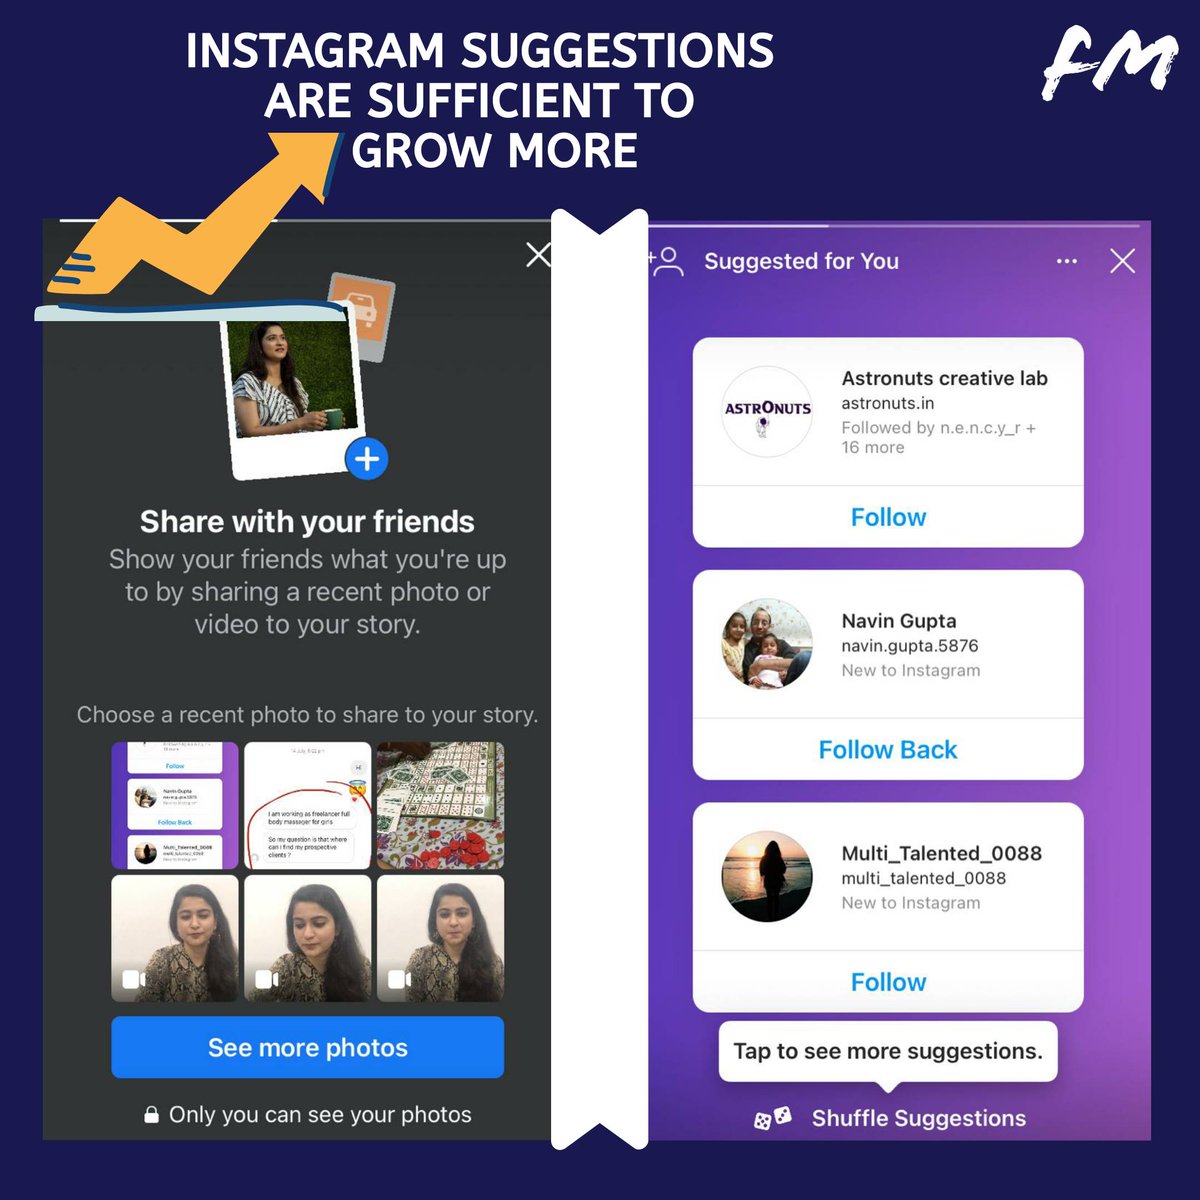 👉INSTAGRAM ADVANCED SUGGESTIONS IN 2020
As Instagram constantly introducing new suggestions this was super amazing 🤩
Happy Instagramming!
#instagrampost #instagramsuggestions #instagramgrowth  #instagrammarketing #socialmediafuture  #socialmediainfluencer #godigitalgrowbusiness